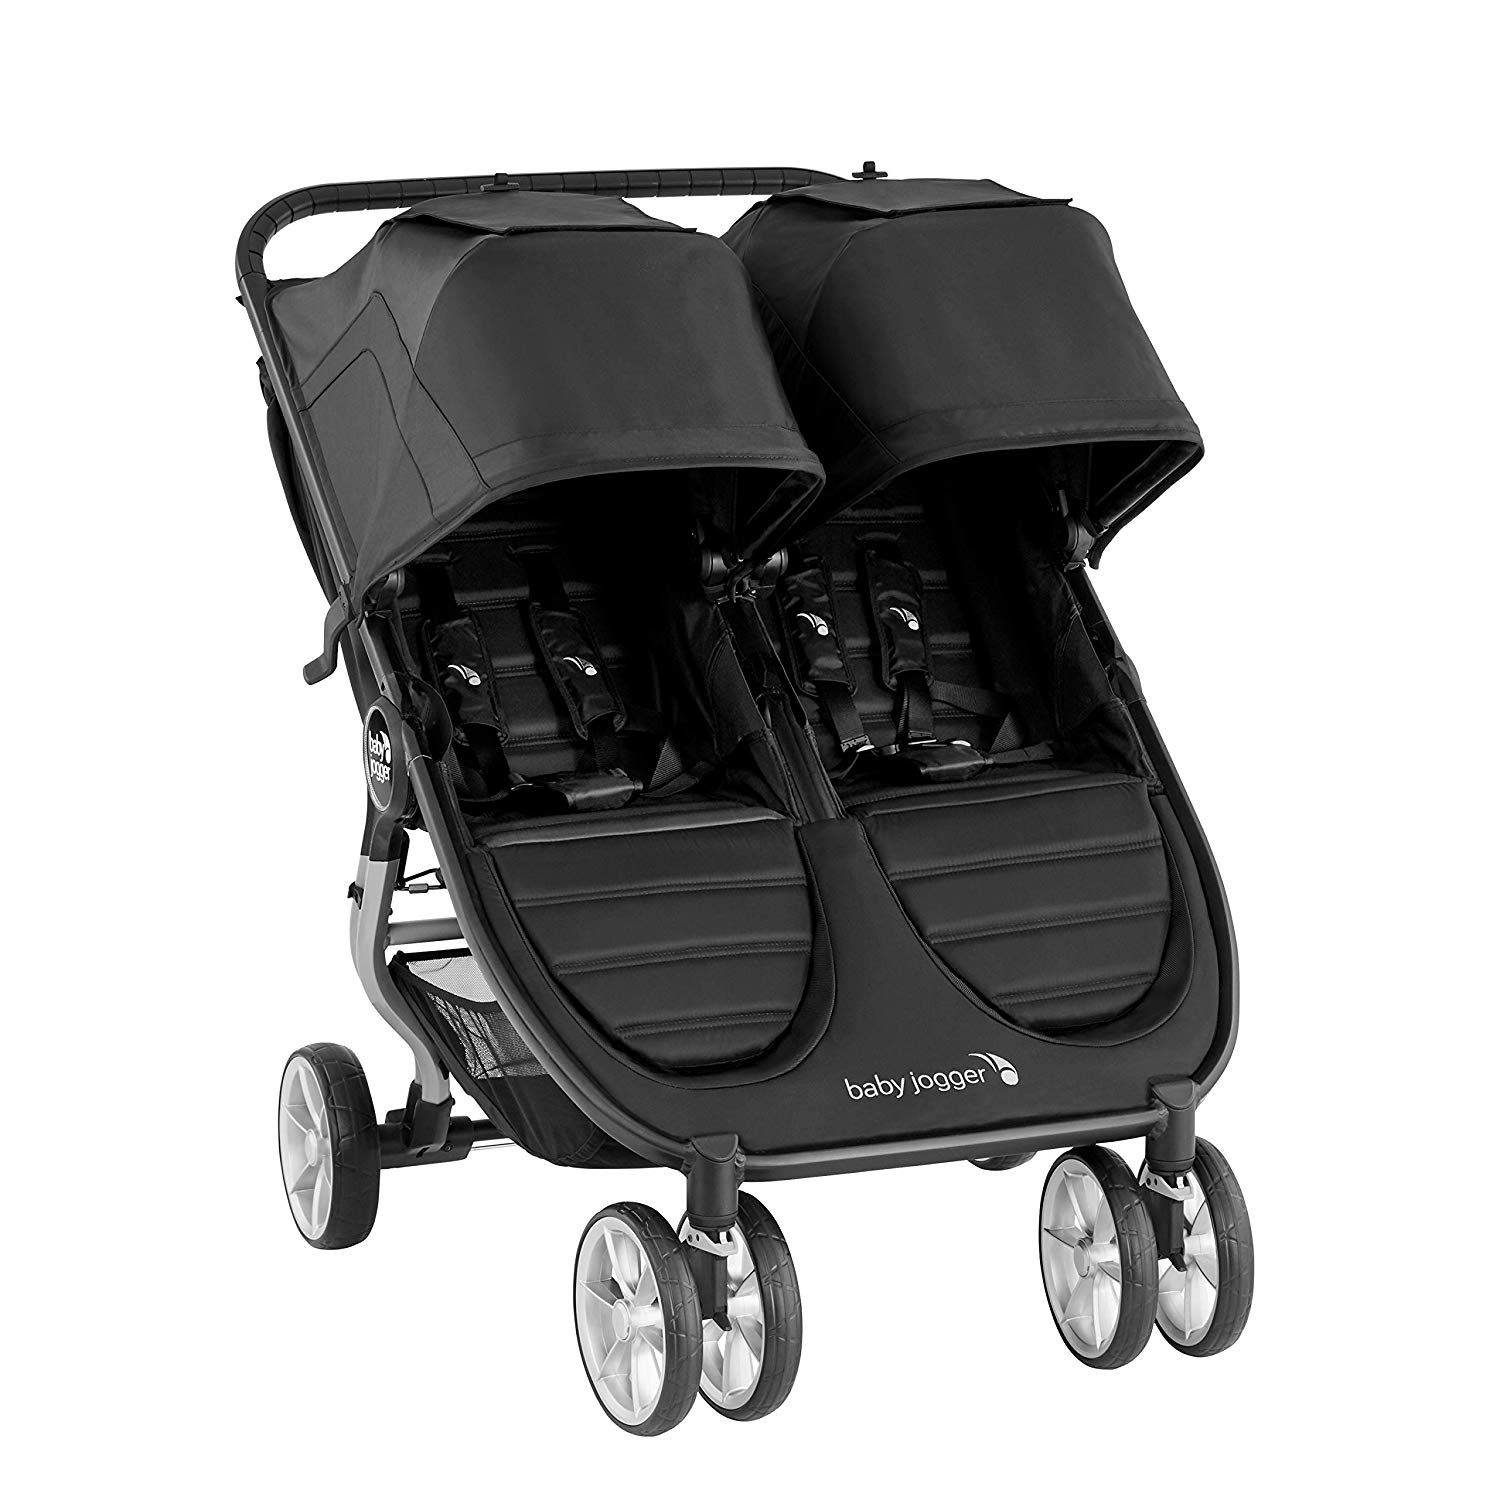 Baby Jogger City Mini 2 Double Stroller Review compact and highquality.